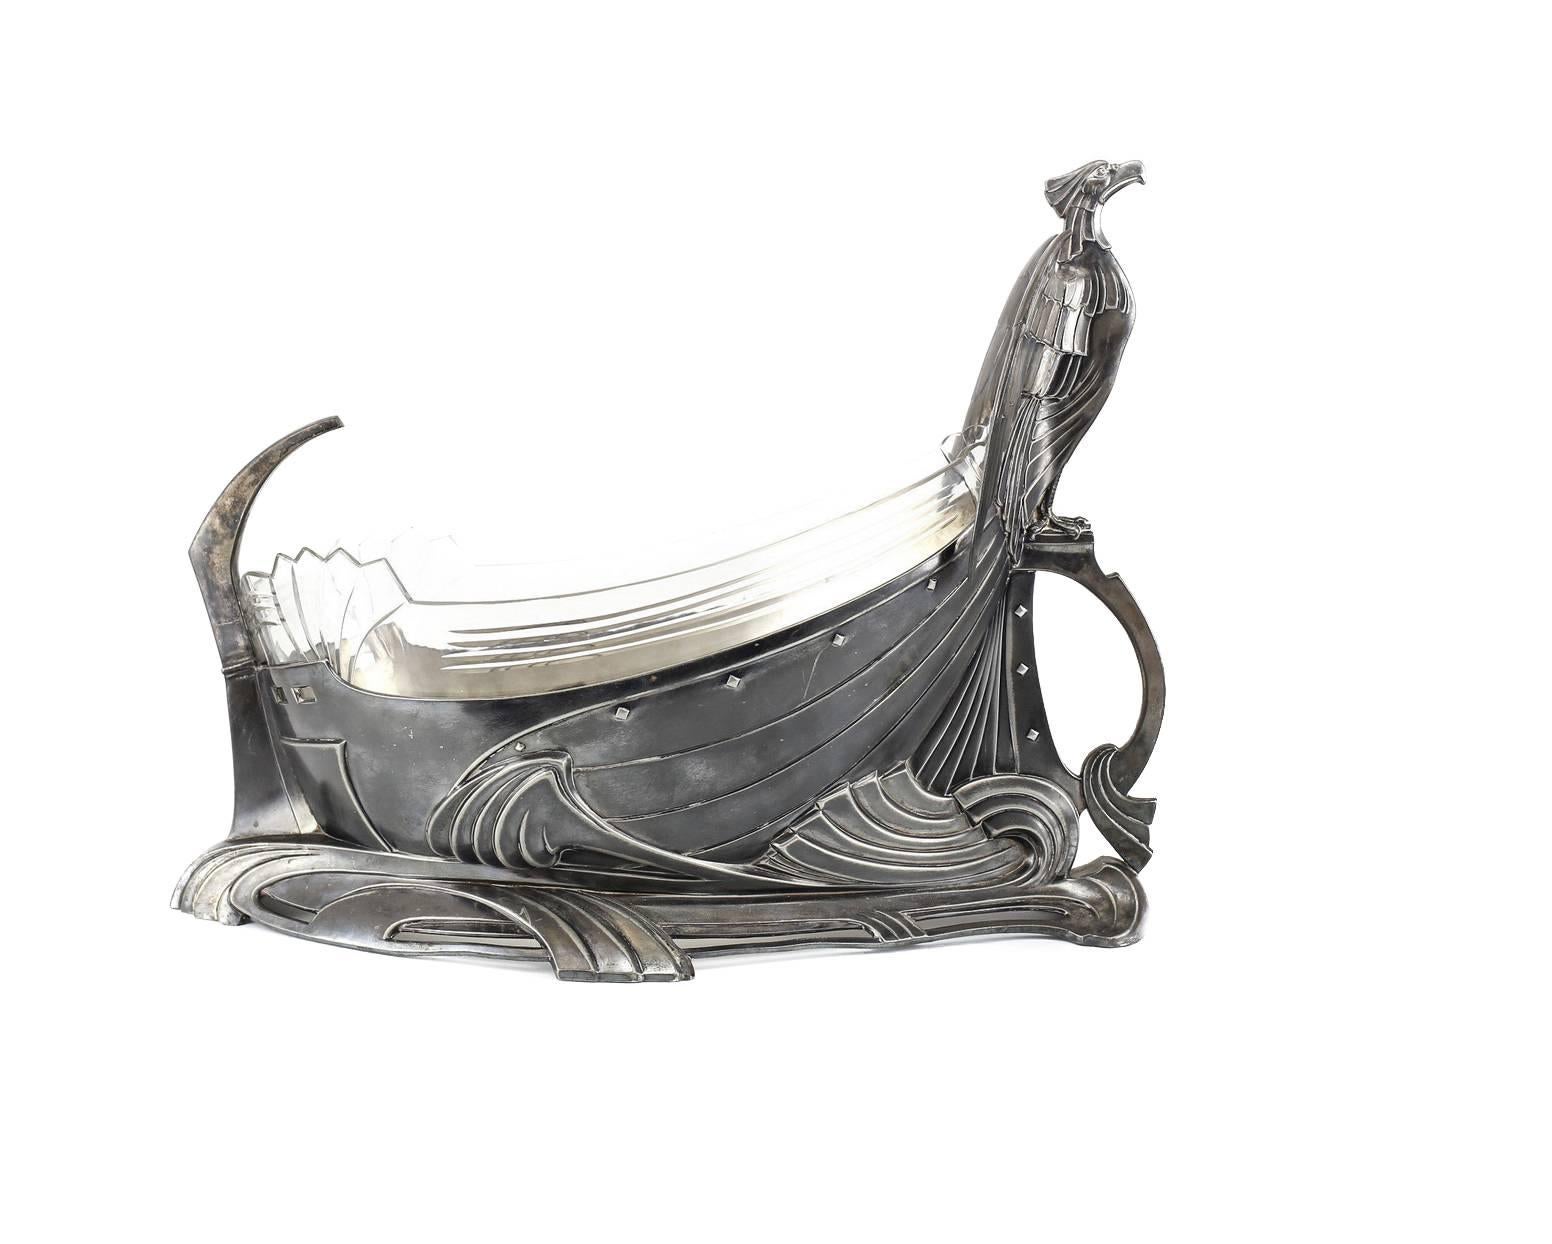 An impressive Arts & Crafts centerpiece bowl by Wurttembergische Metallwarenfabrik (WMF) taking the form of Viking ship. The bow prominently cast with a perched Griffin, beautiful conjoined waves creating a sense of movement. The original